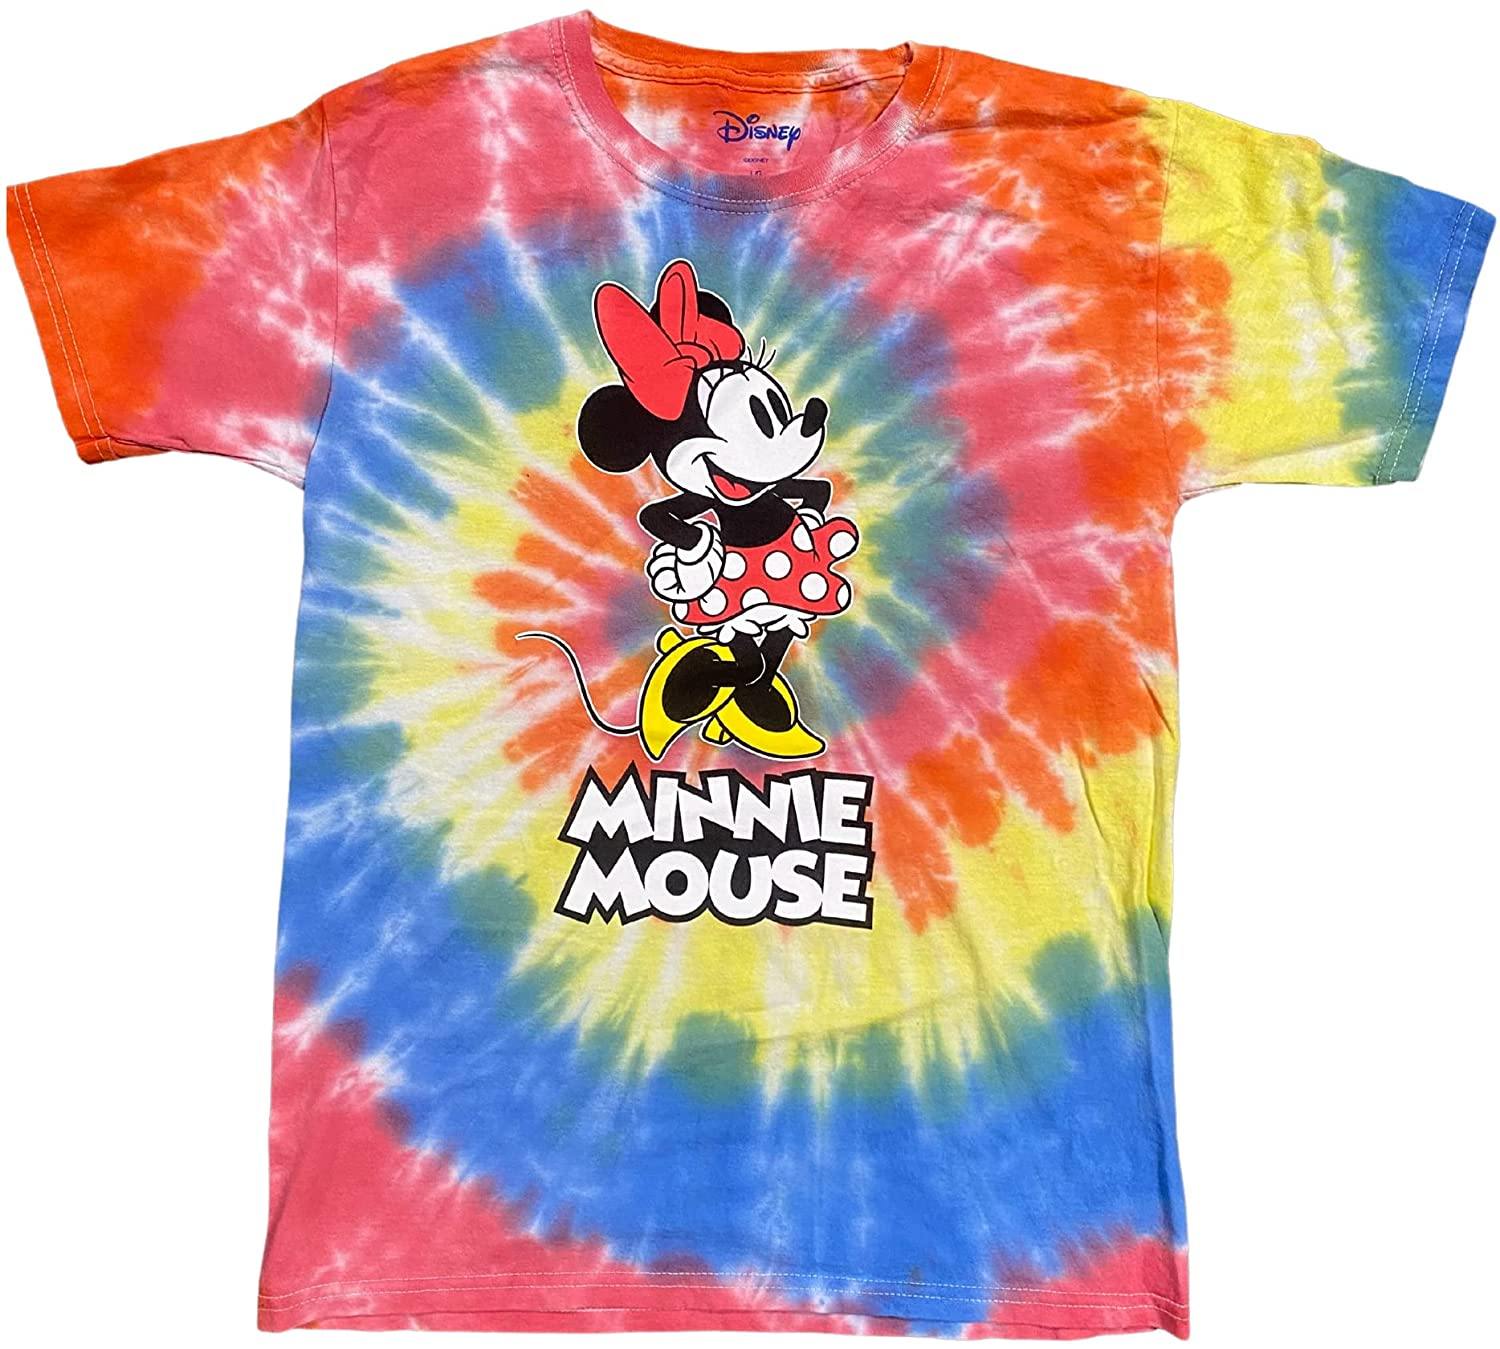 Multi Colored Spiral Tie Dye Minnie Mouse Classic Pose T-Shirt for Kids, Retro Disney Youth Vacation Shirts